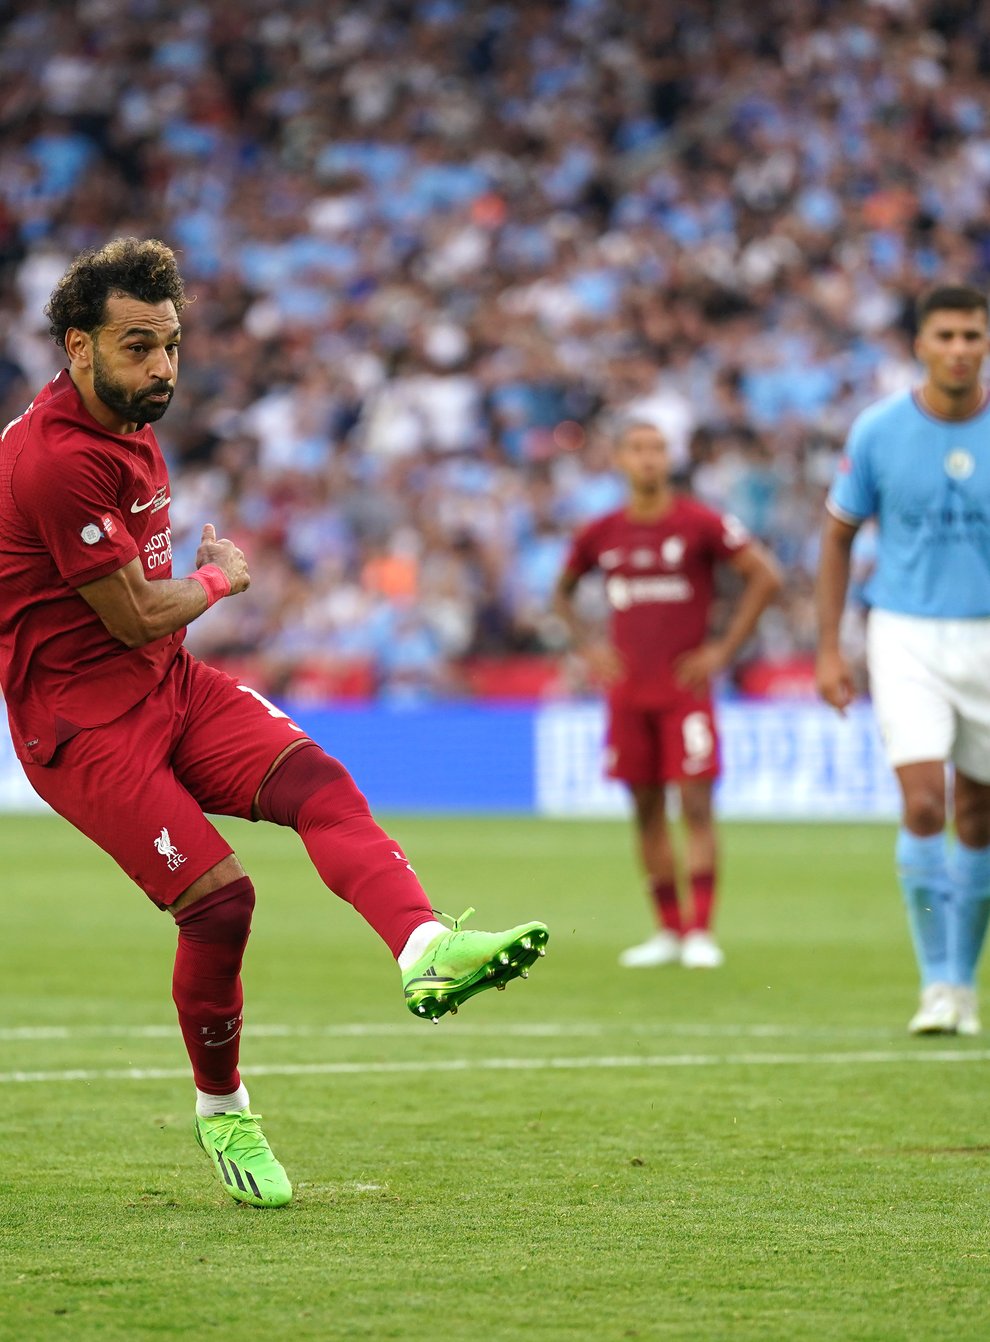 Liverpool’s Mohamed Salah was on good form in last weekend’s FA Community Shield victory over Manchester City (Nick Potts/PA)